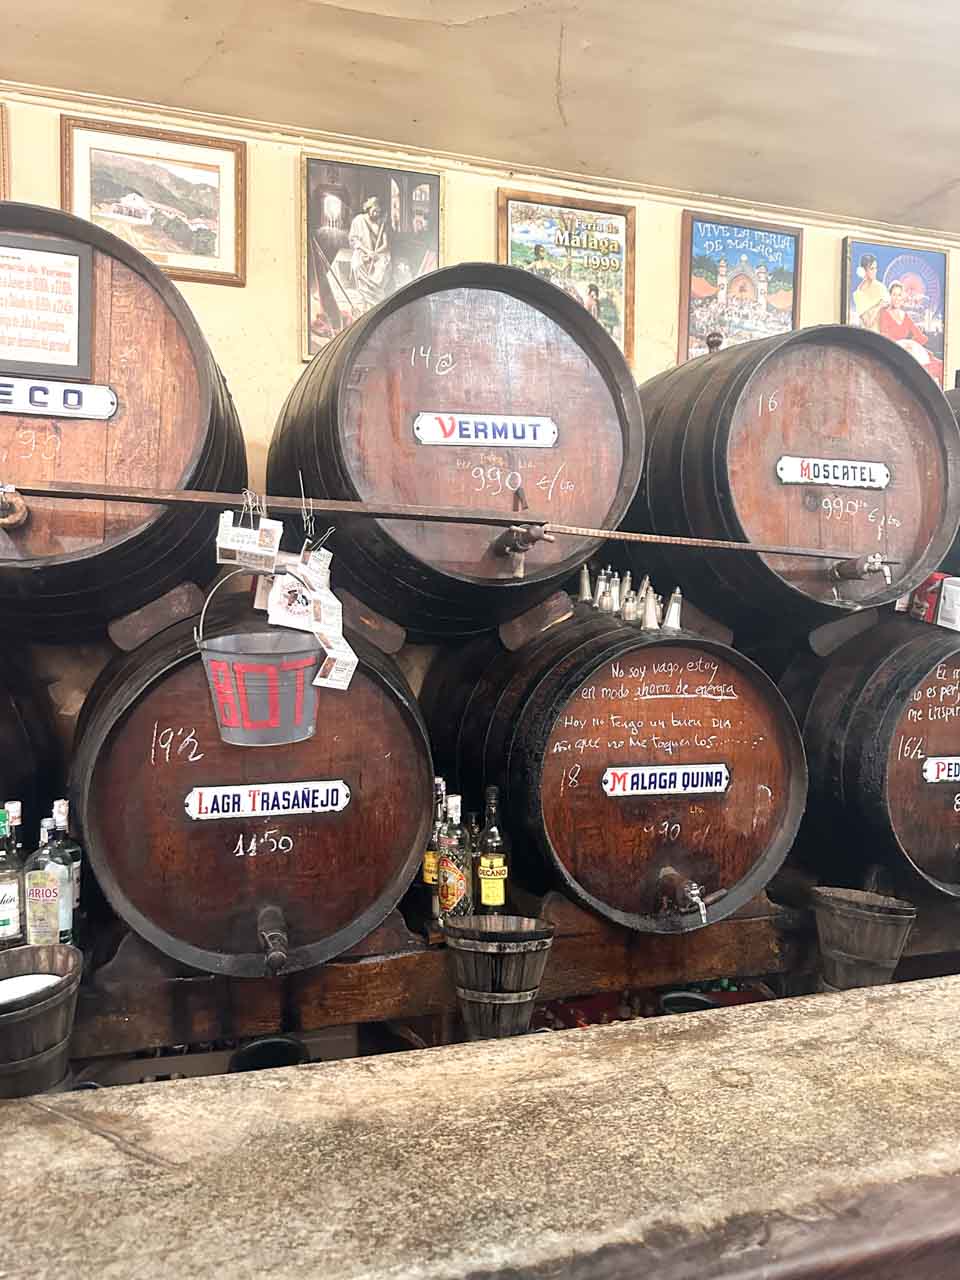 Wooden wine barrels labelled with various types of Spanish wines and vermouths at Antigua Casa de Guardia in Malaga, Spain